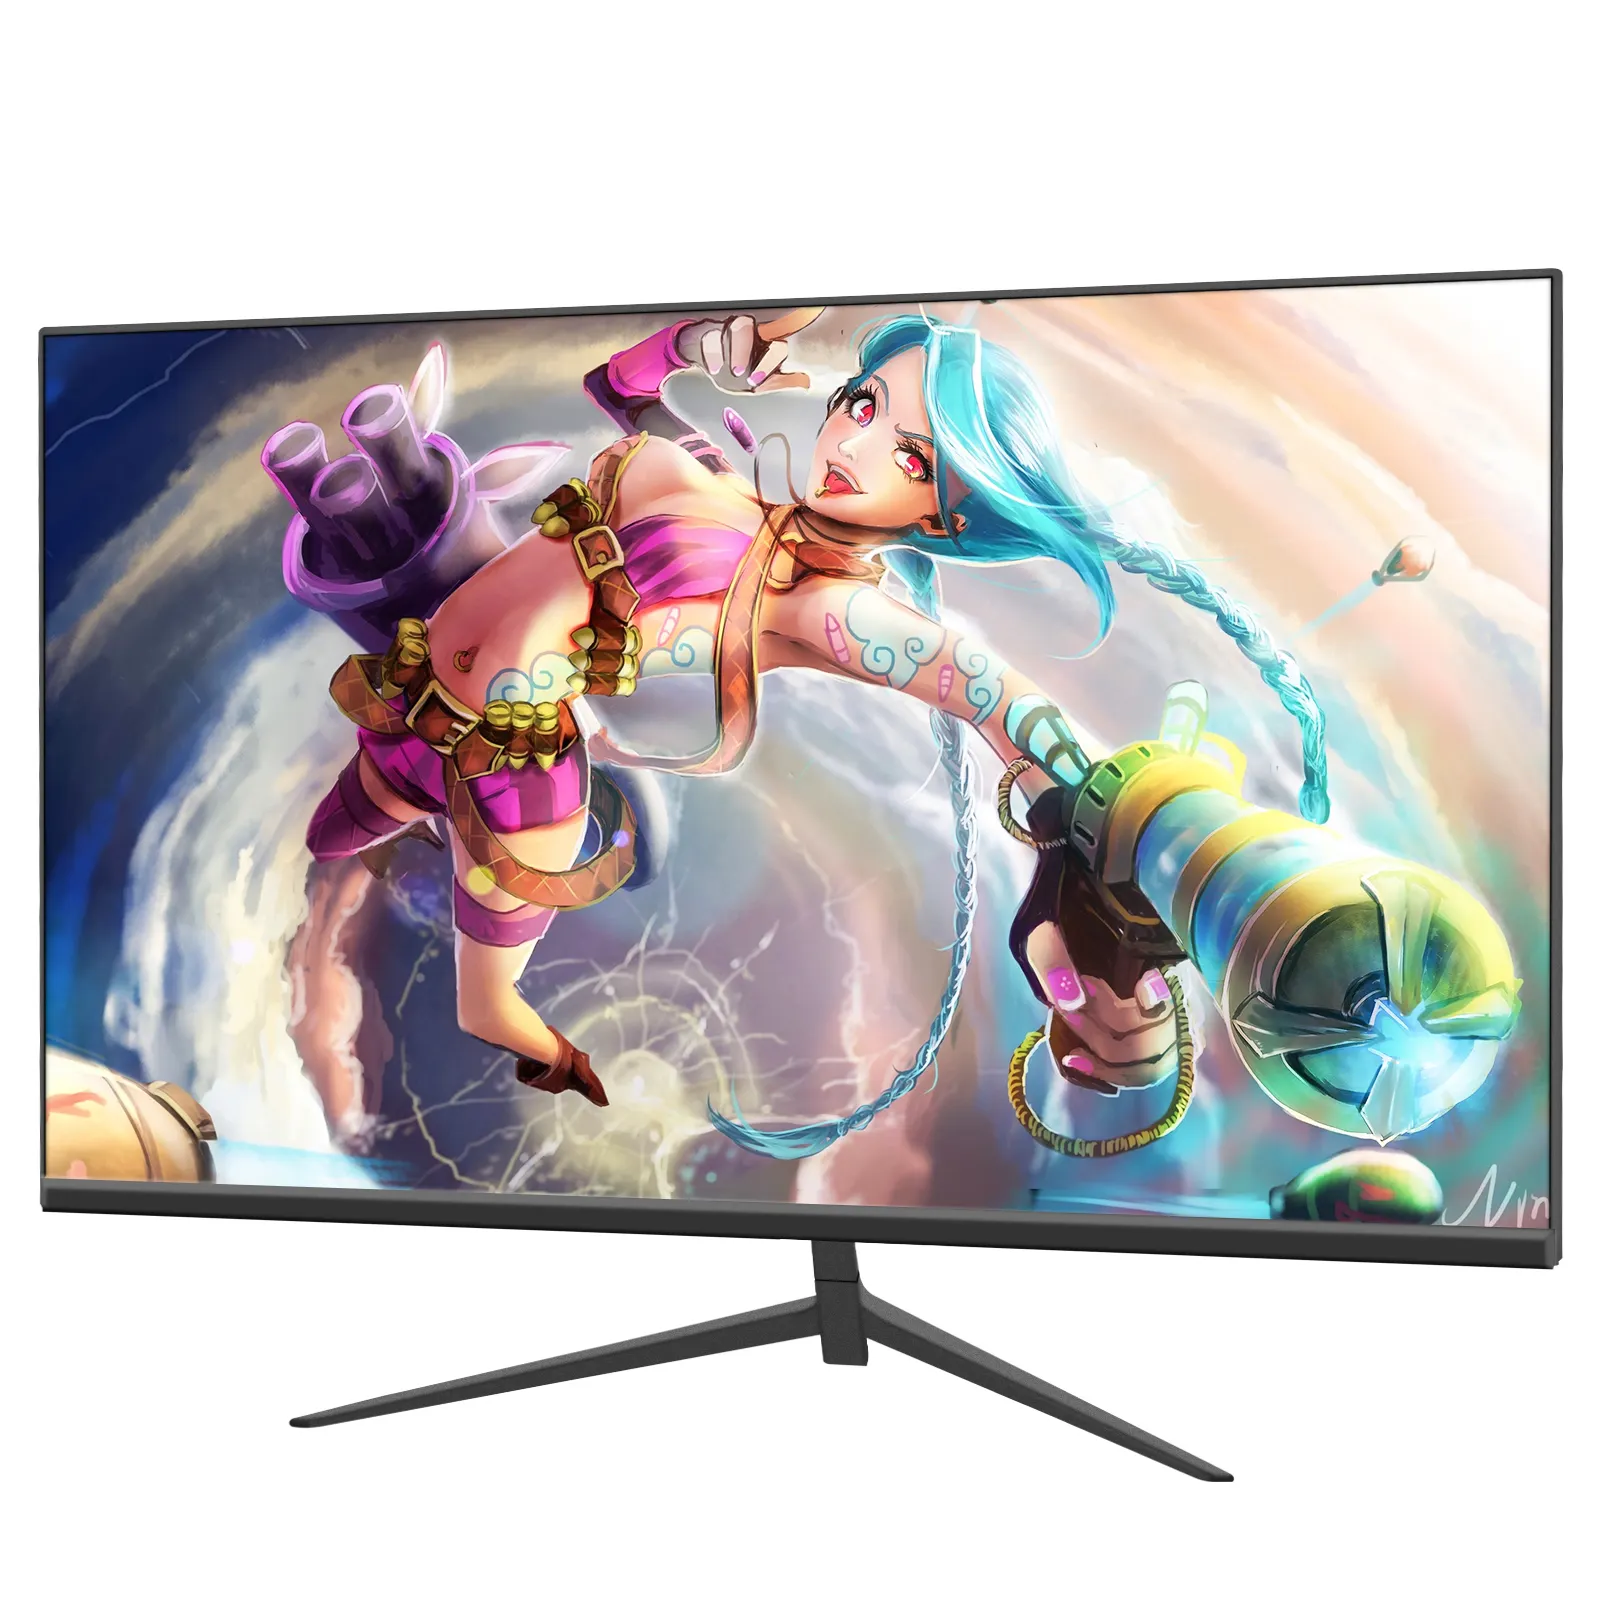 Tecmiyo R1500 VA 27inch FHD 3-frameless bezel Curved LED LCD Gaming Monitor with V-Shape Stand